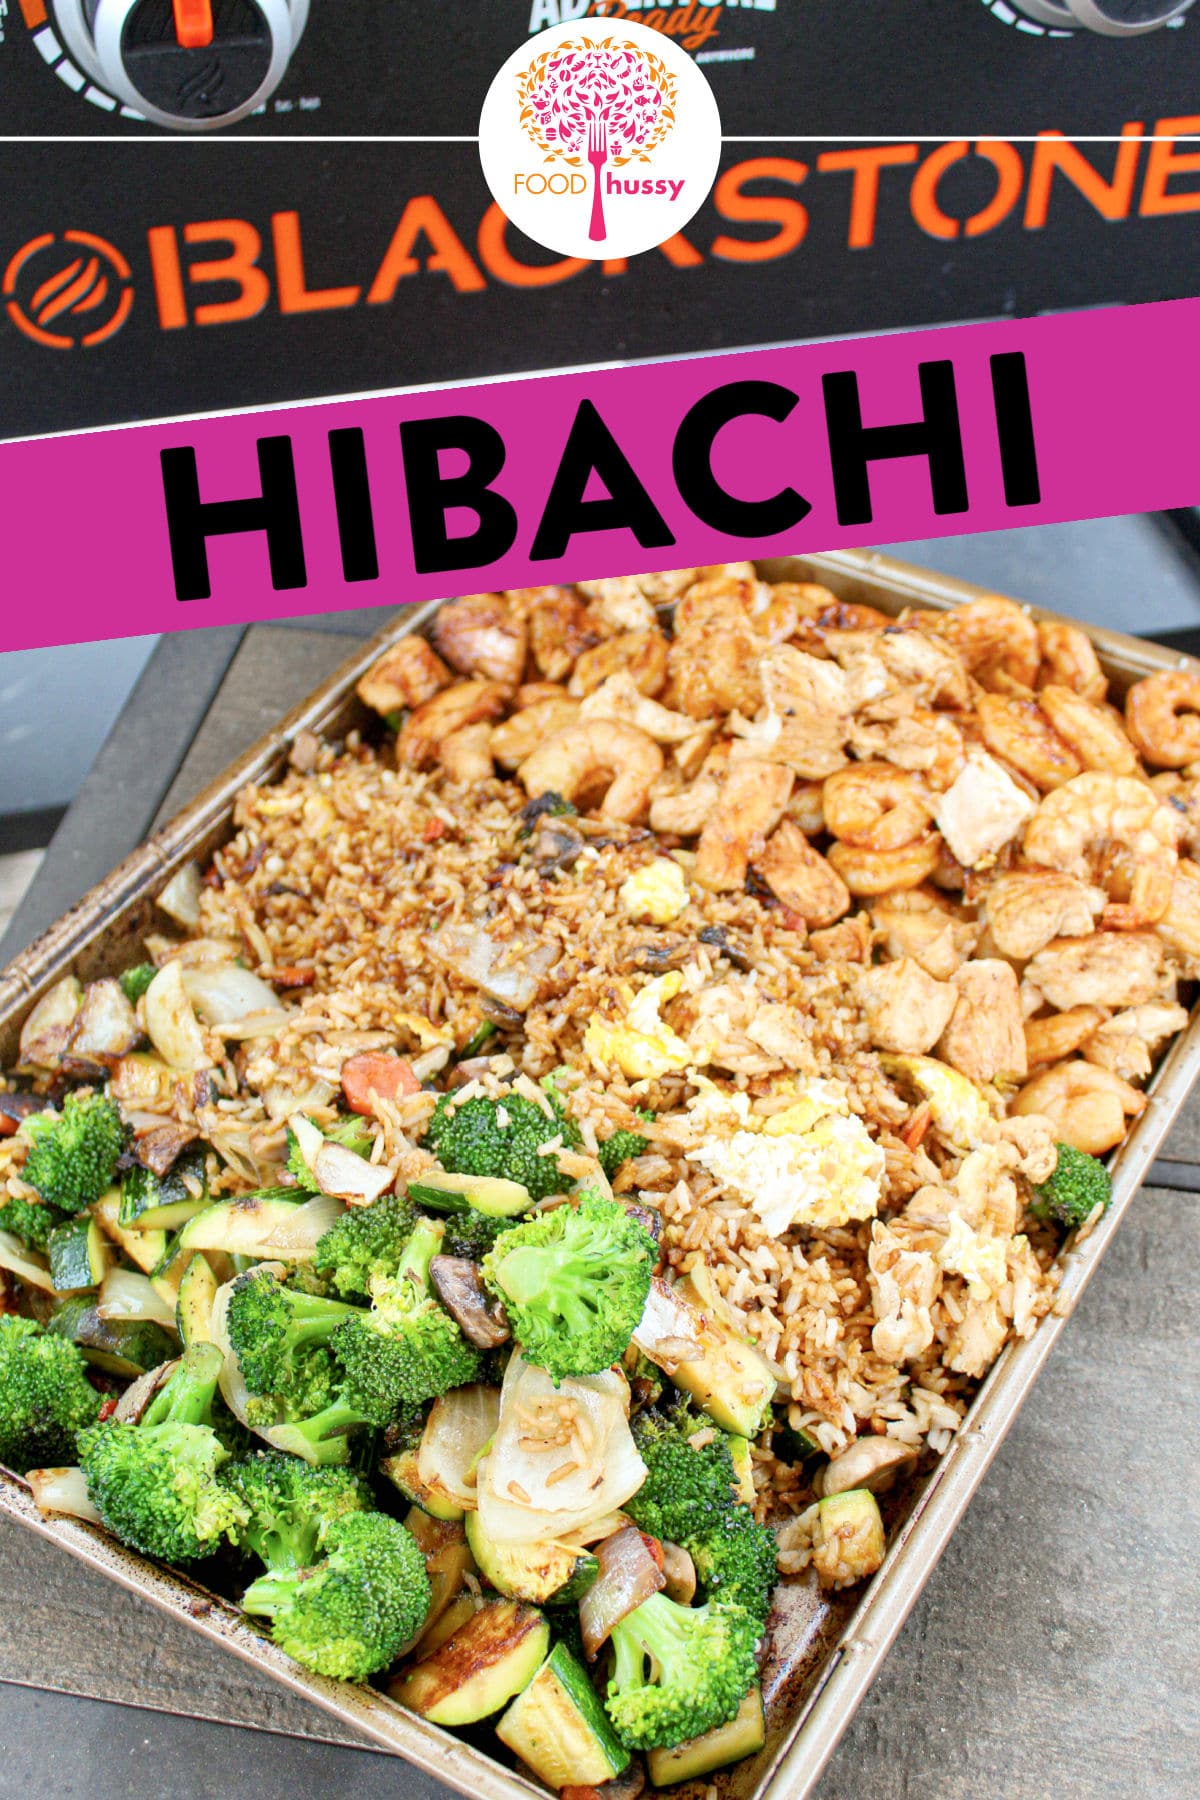 Making Hibachi on the Blackstone is my new favorite dinner! It's really three recipes in one - delicious fried rice, loads of teriyaki veggies and - of course - Hibachi shrimp & chicken! via @foodhussy